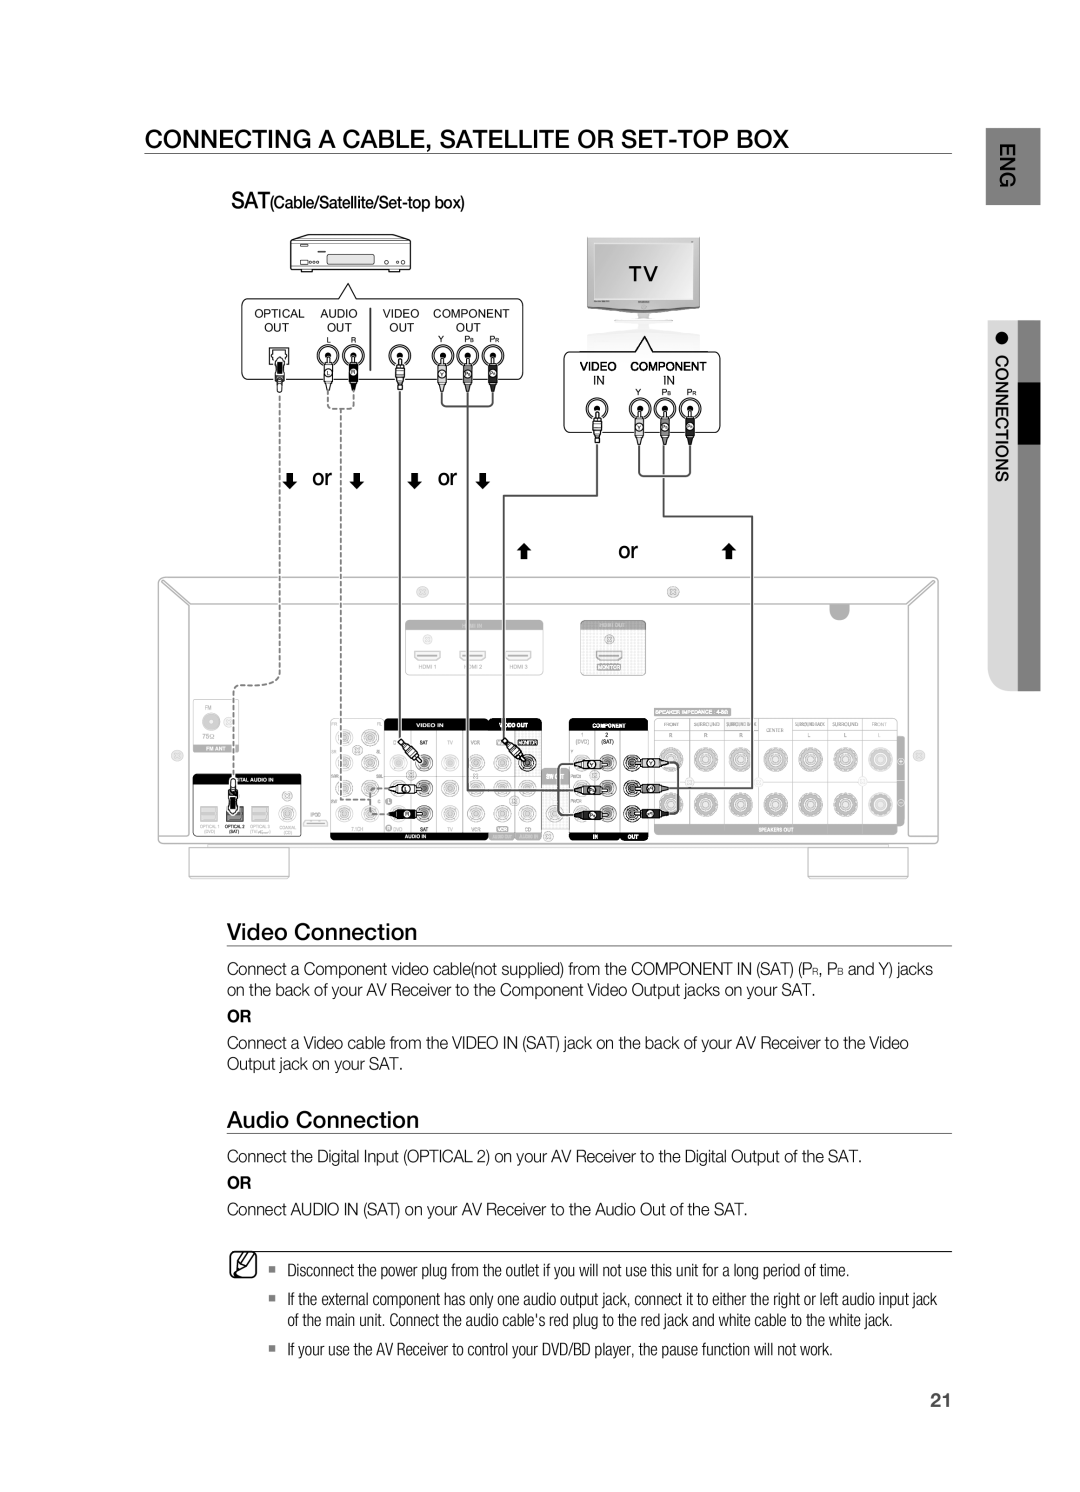 Samsung HT-AS730ST user manual Connecting a Cable, Satellite or Set-topbox, or or or Video Connection, Audio Connection 